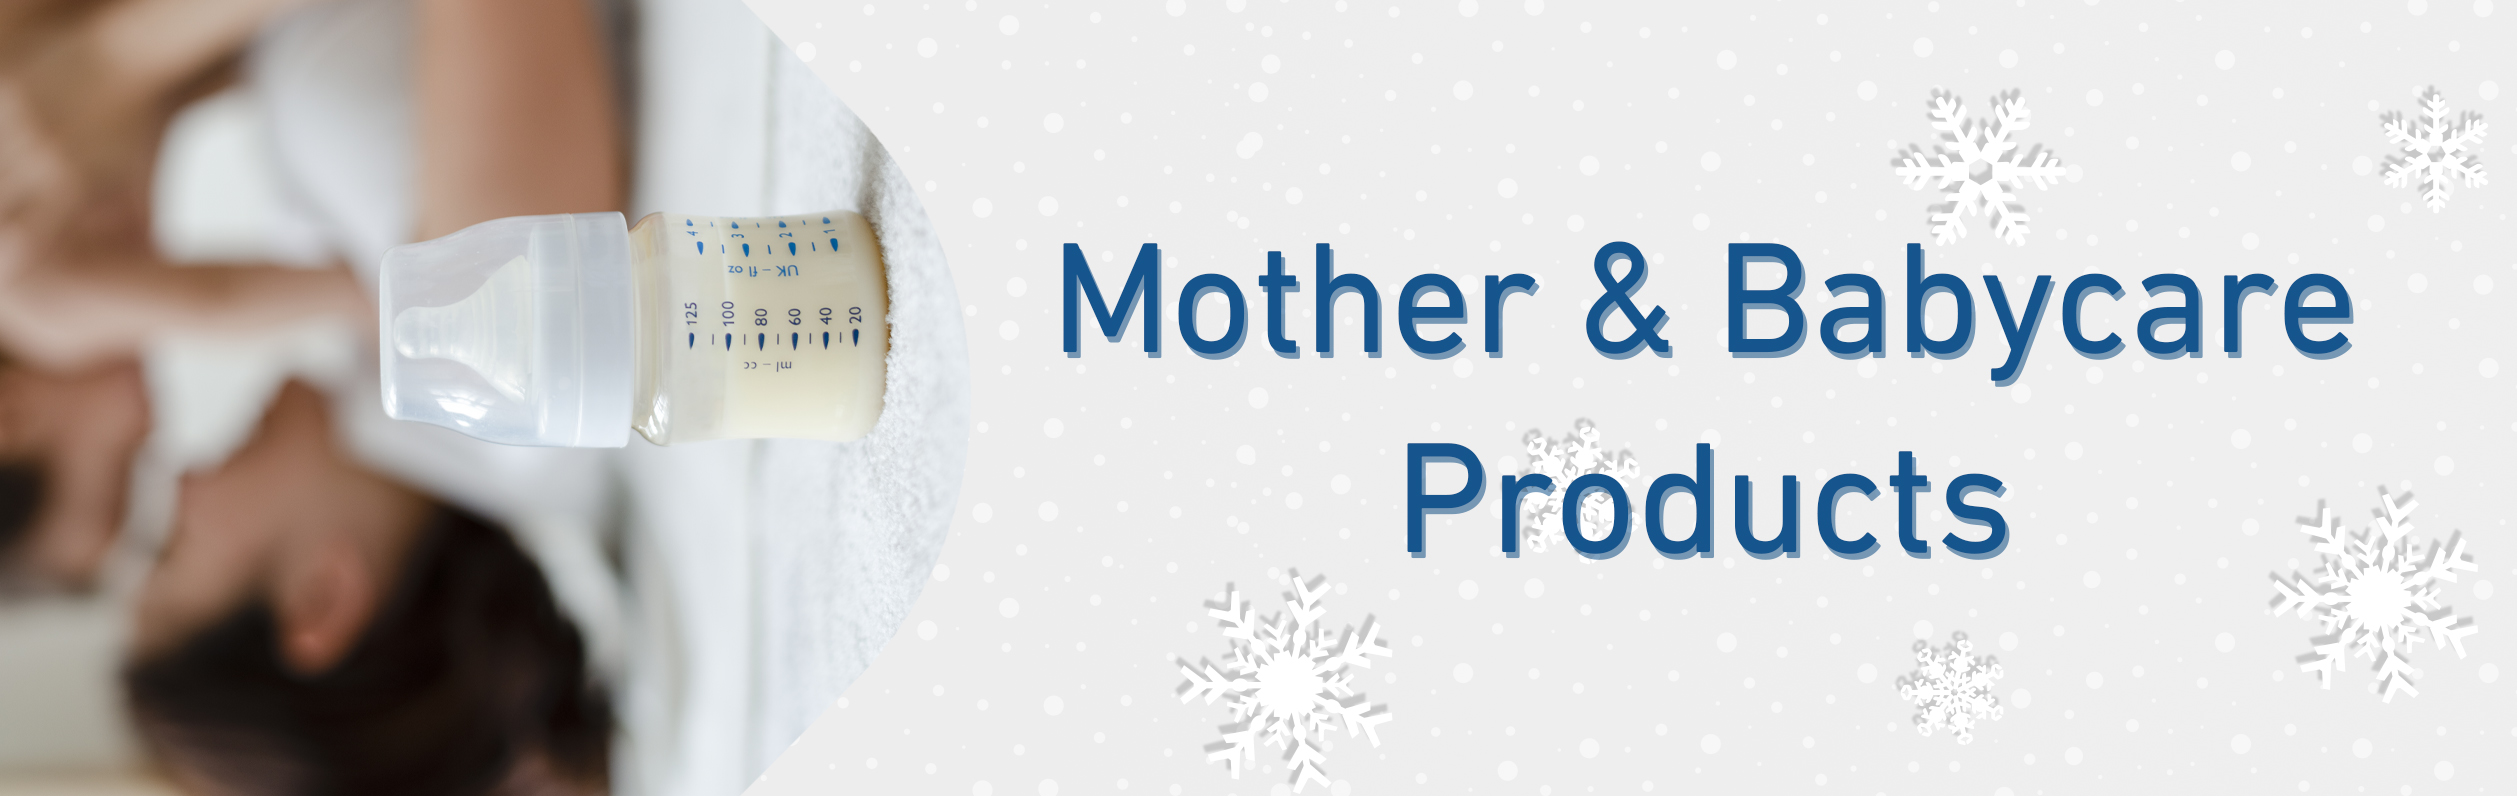 Mother & Babycare Products